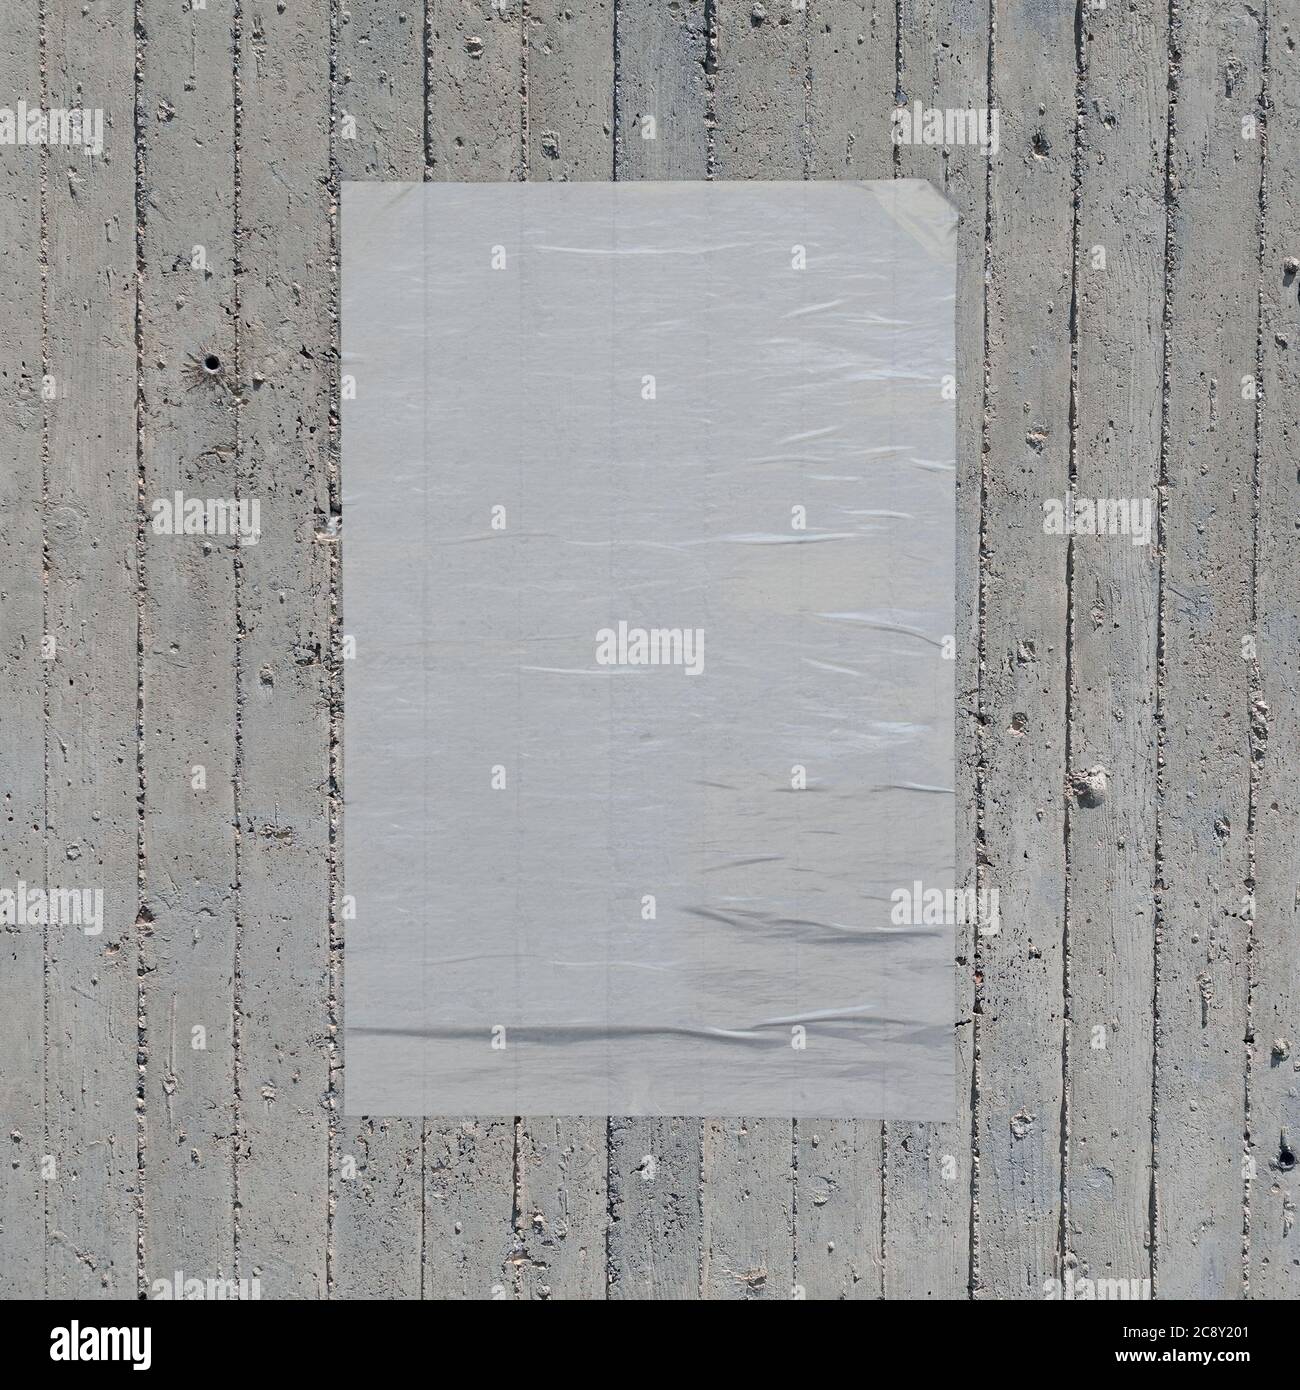 White crumpled paper wheatpaste poster on concrete wall background. Design element. Stock Photo